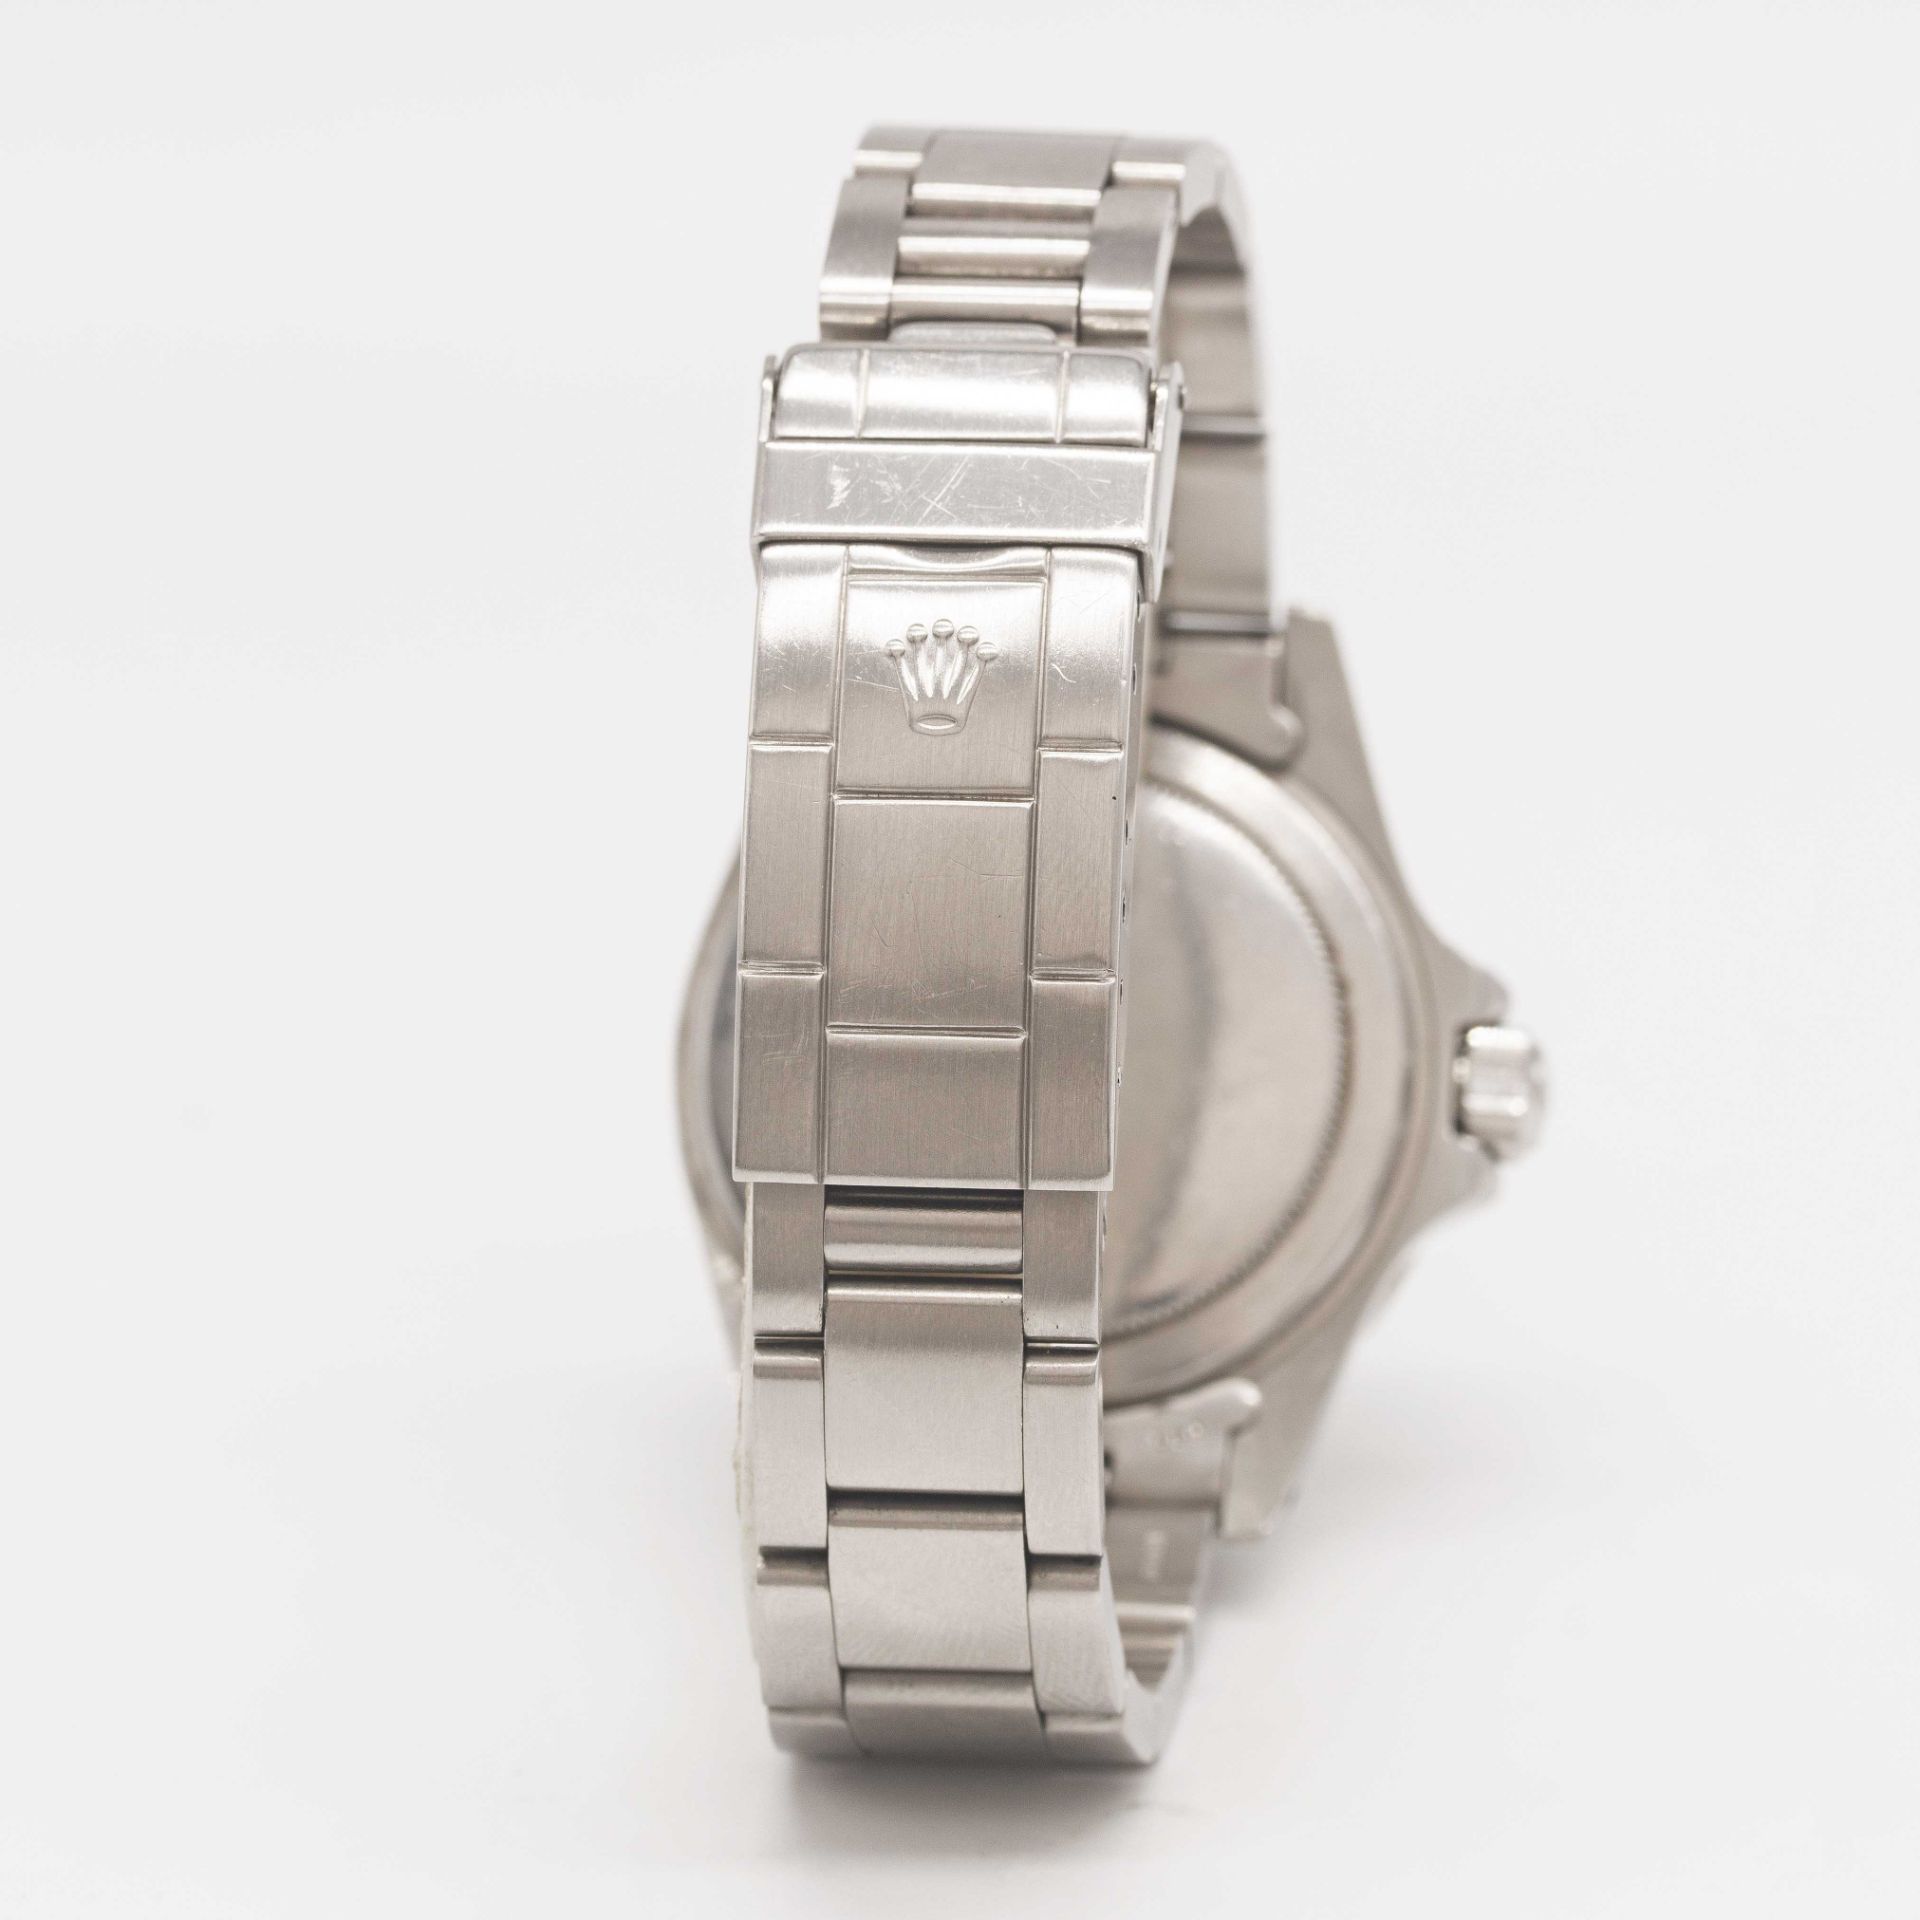 A GENTLEMAN'S STAINLESS STEEL ROLEX OYSTER PERPETUAL DATE SUBMARINER BRACELET WATCH CIRCA 1978, REF. - Image 6 of 10